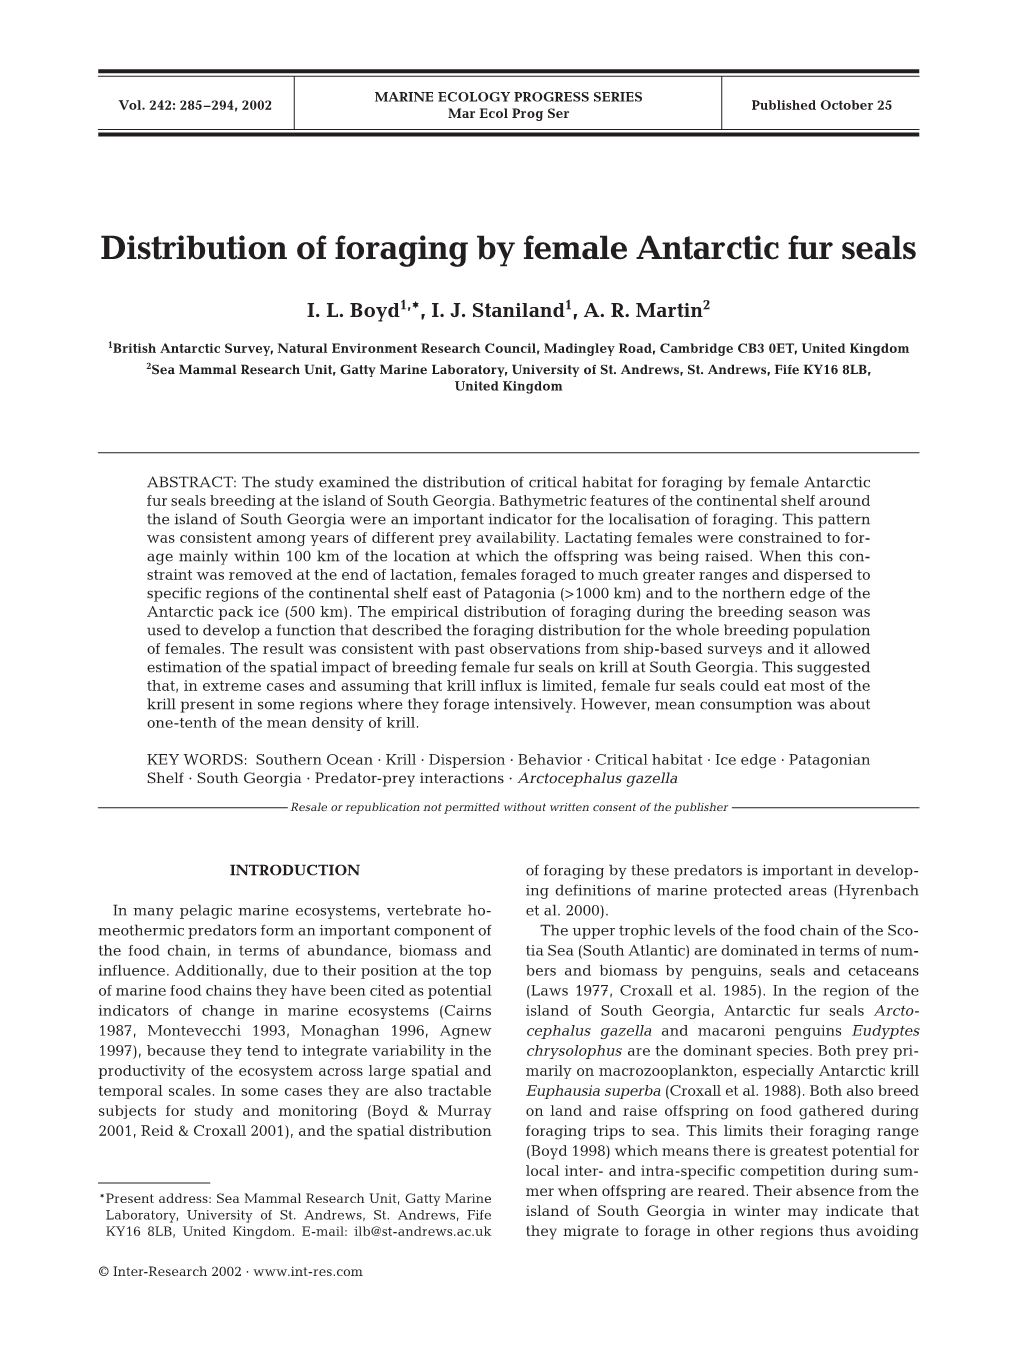 Distribution of Foraging by Female Antarctic Fur Seals